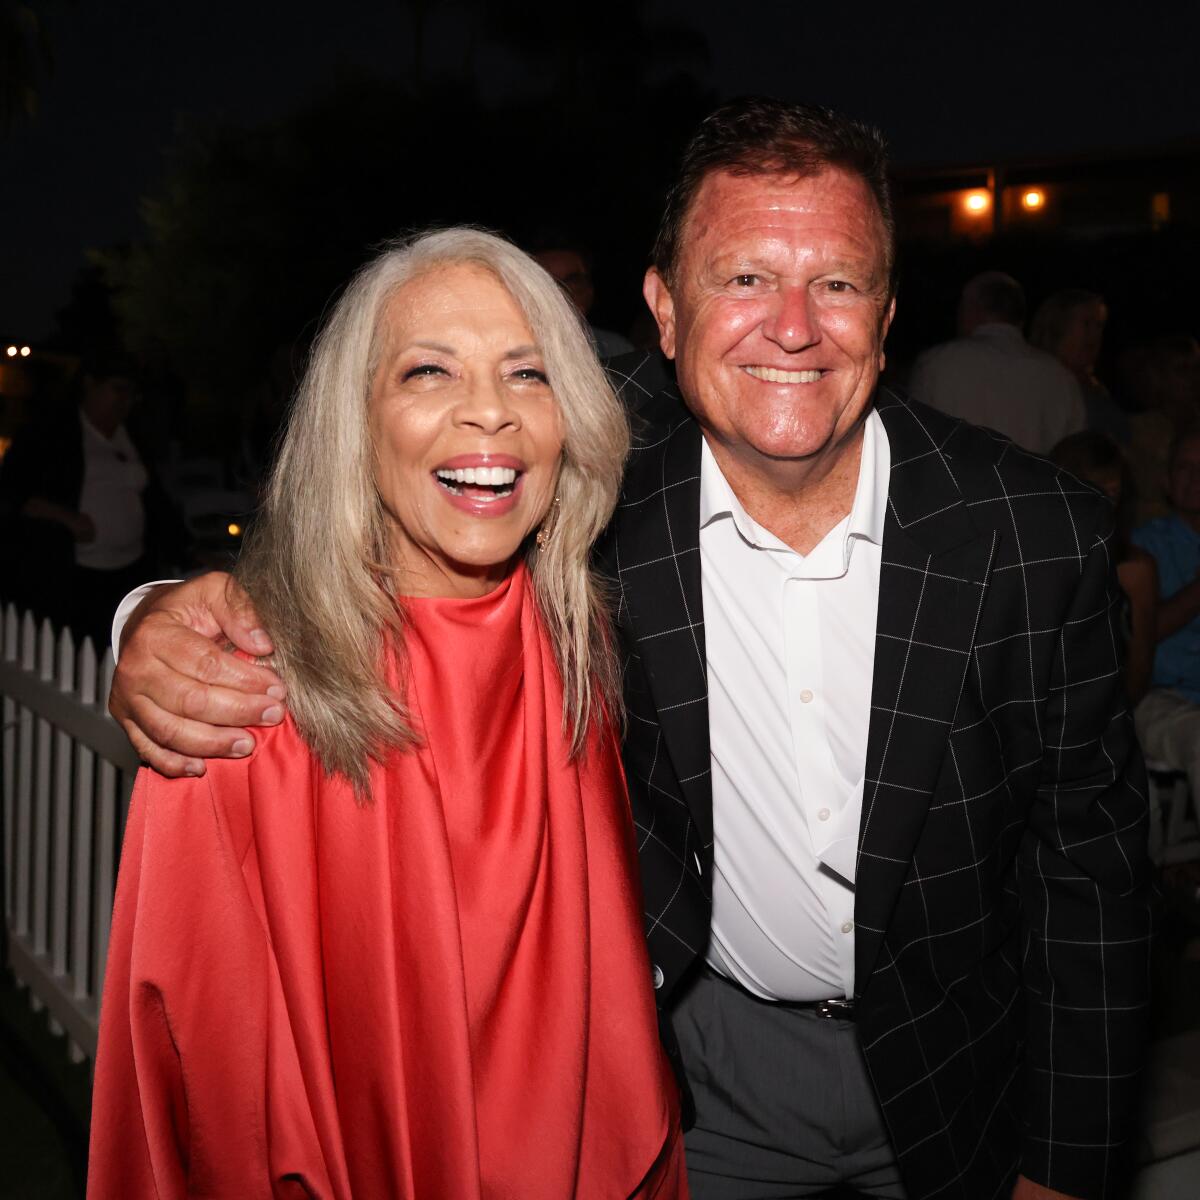 Patti Austin with High Hopes Head Injury founder Mark Desmond at the “Eric Marienthal and Friends” jazz concert.